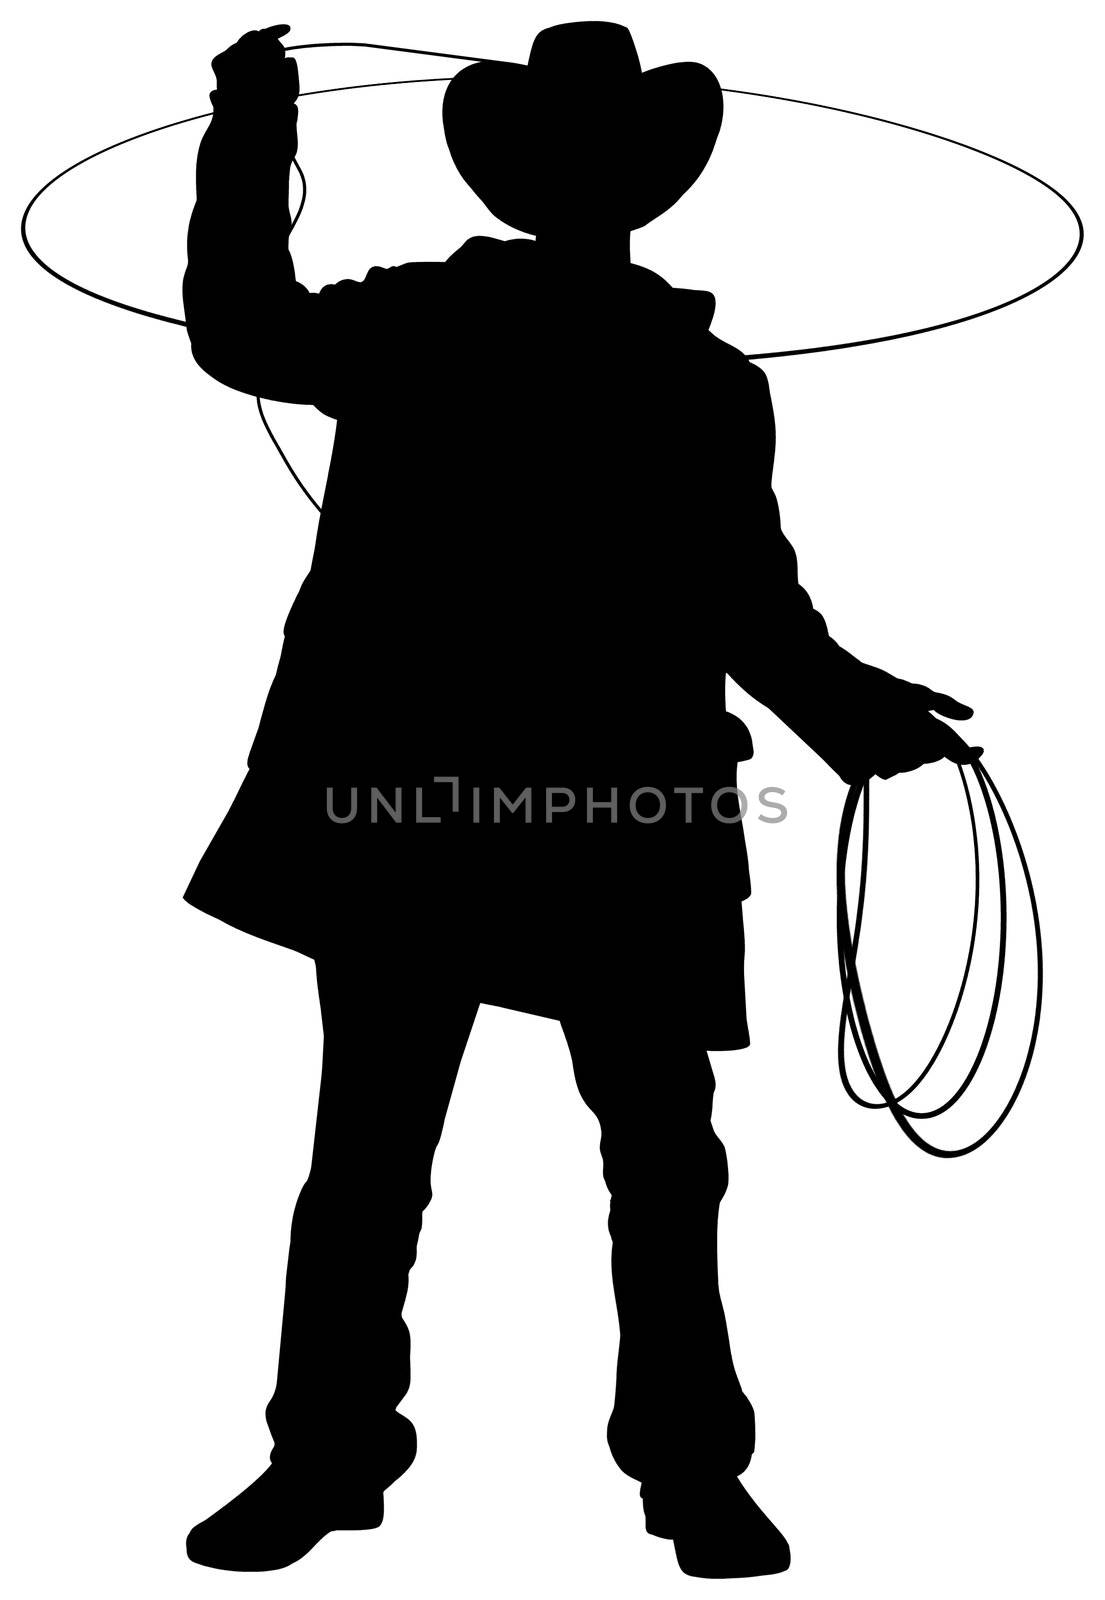 Illustration of a cowboy using a lasso